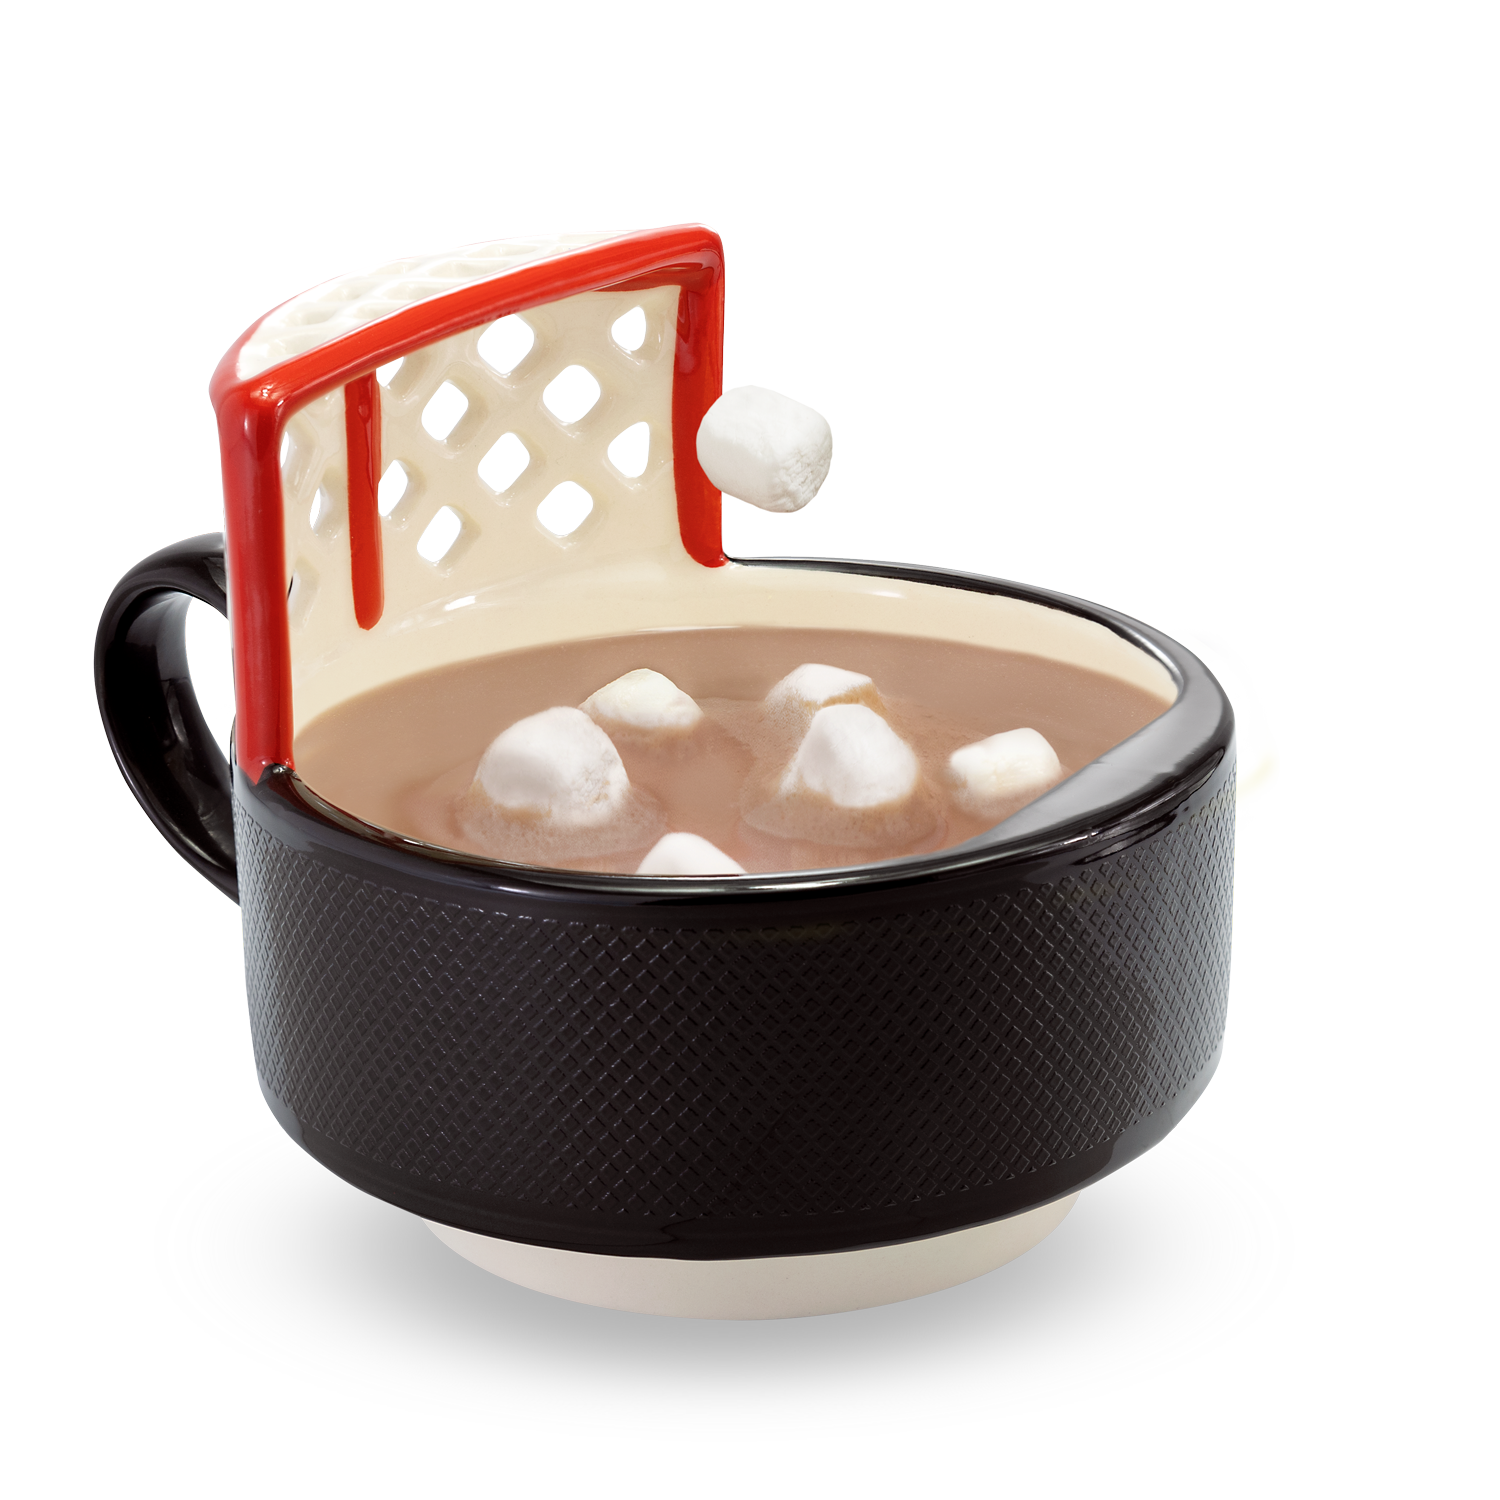 The Hockey Mug with a Net! START YOUR MORNINGS WITH FUN! Play with your food with this original hockey mug with an attached net. Perfect for scoring mini marshmallows into cocoa, cereal into milk, crackers into soup, or toppings onto ice cream! Something to root for in your morning routine!